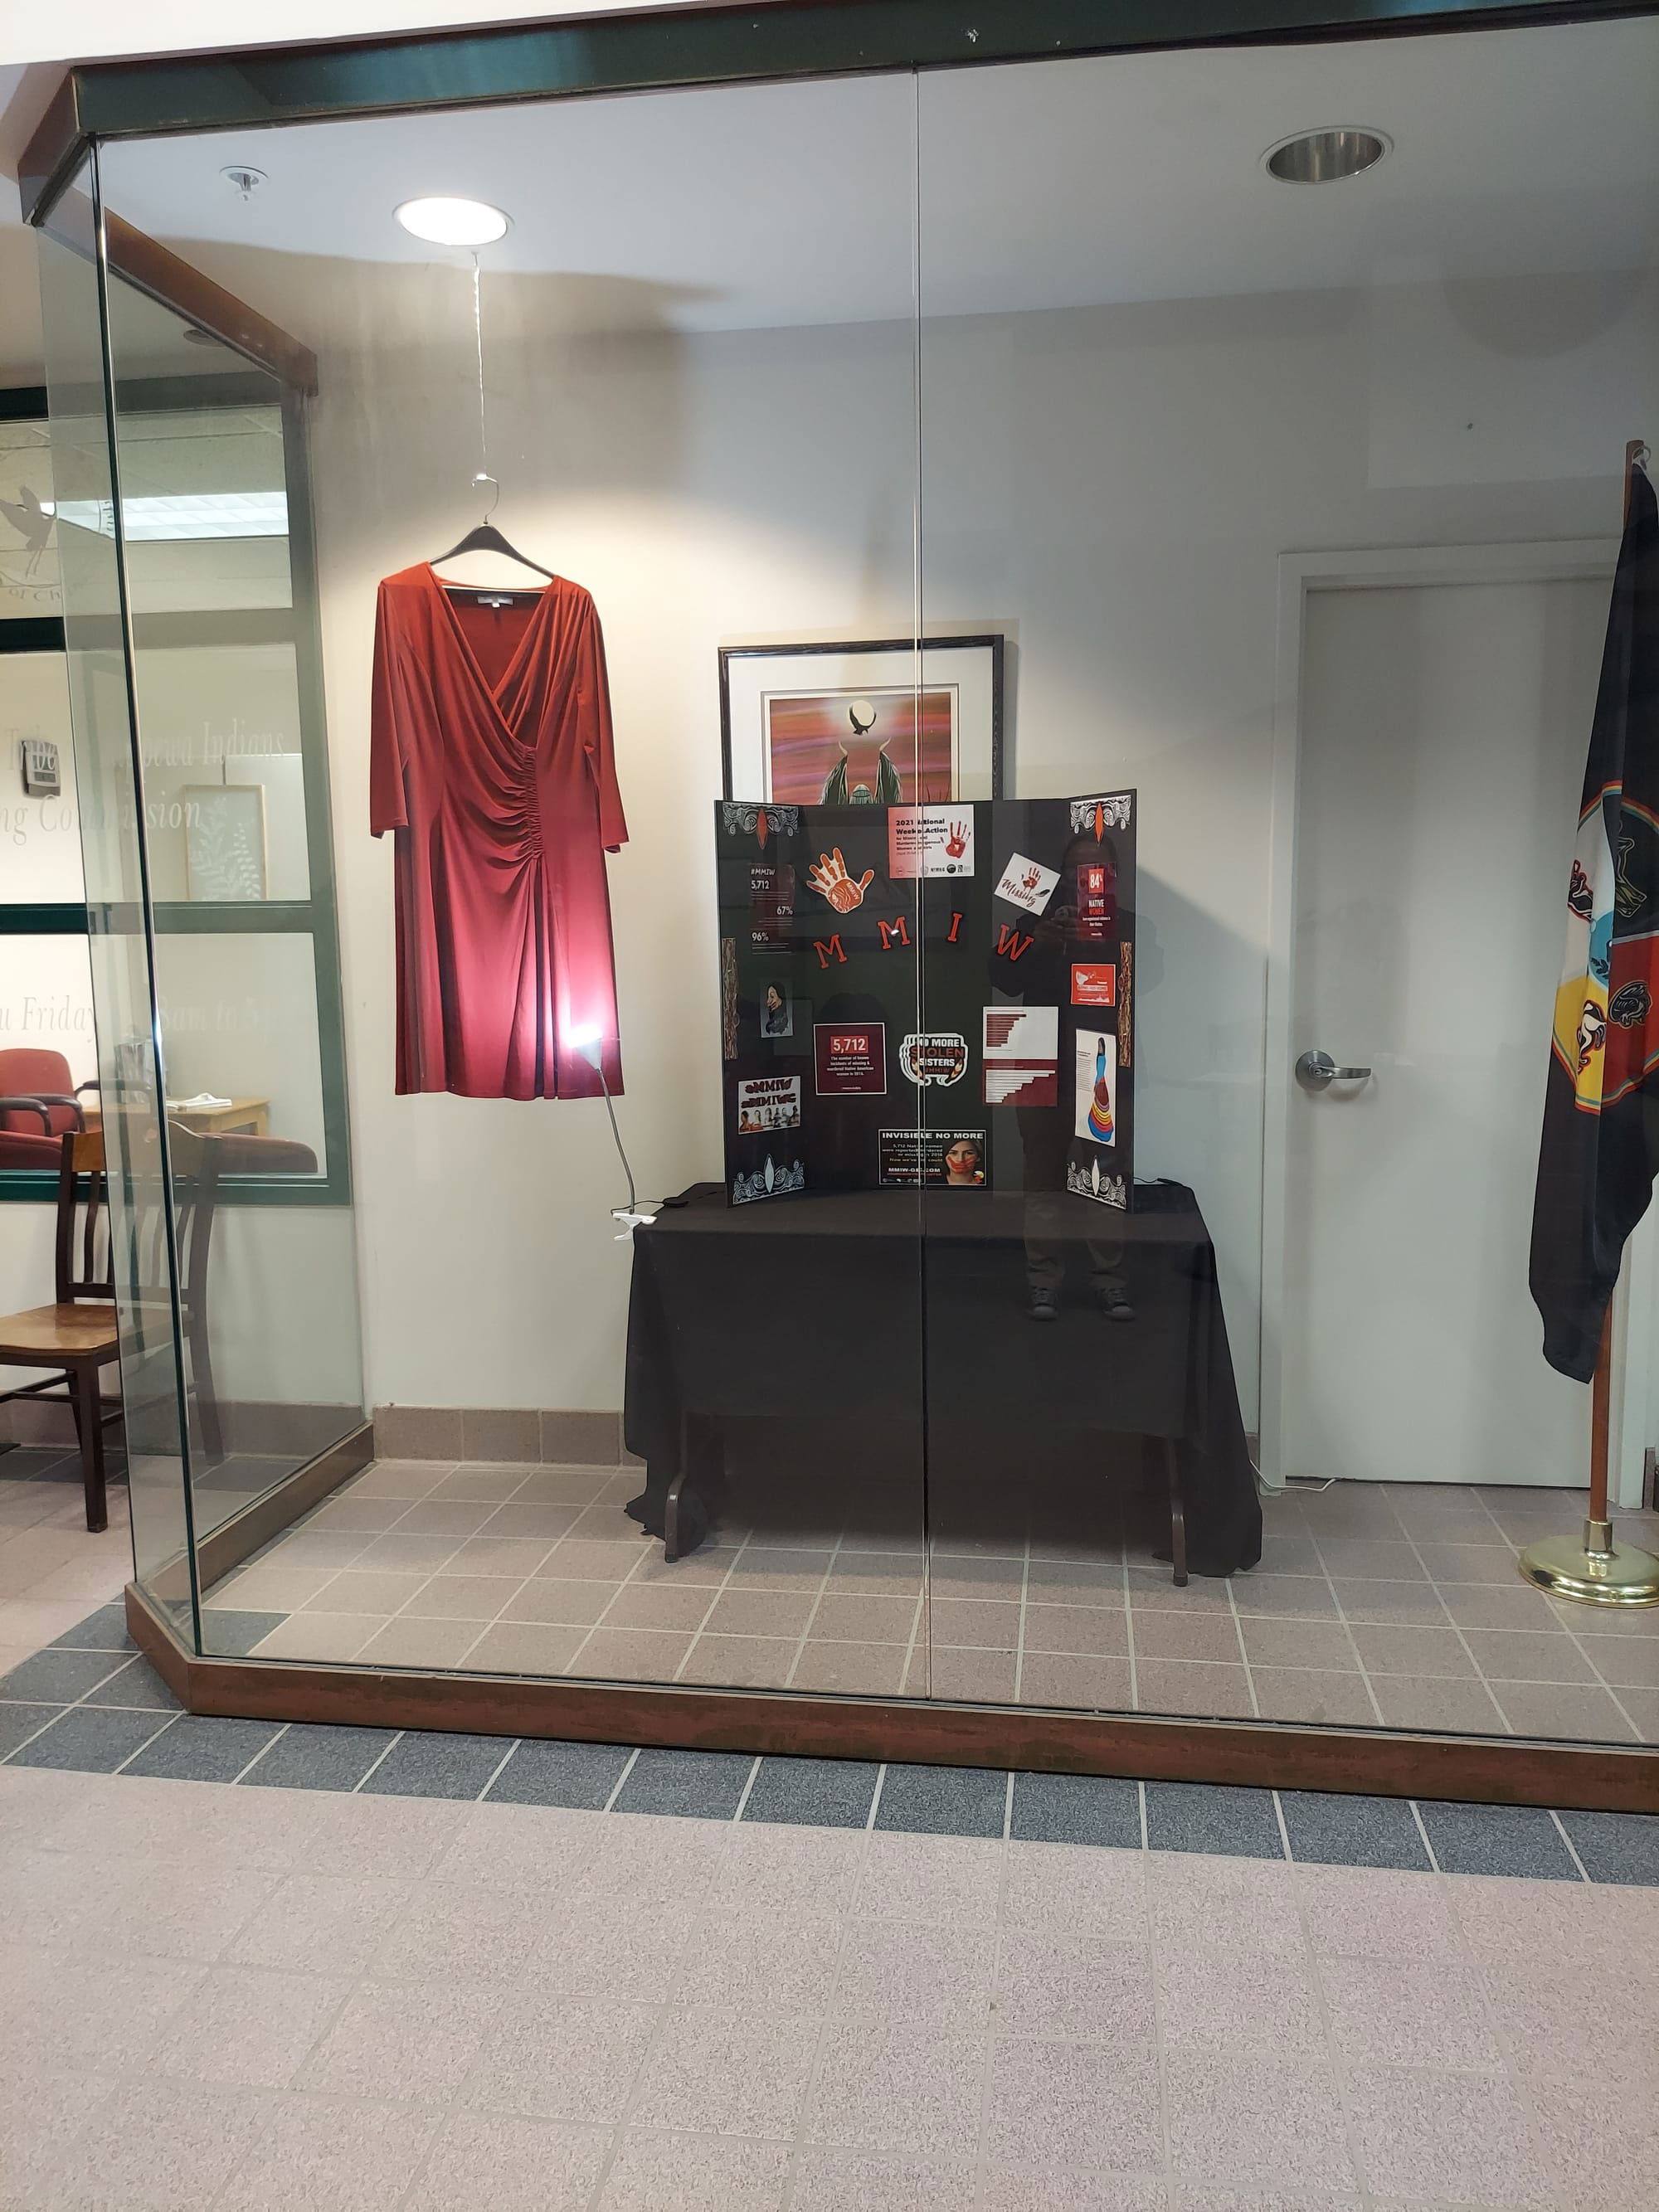 Red Dress Display at Gaming Commission